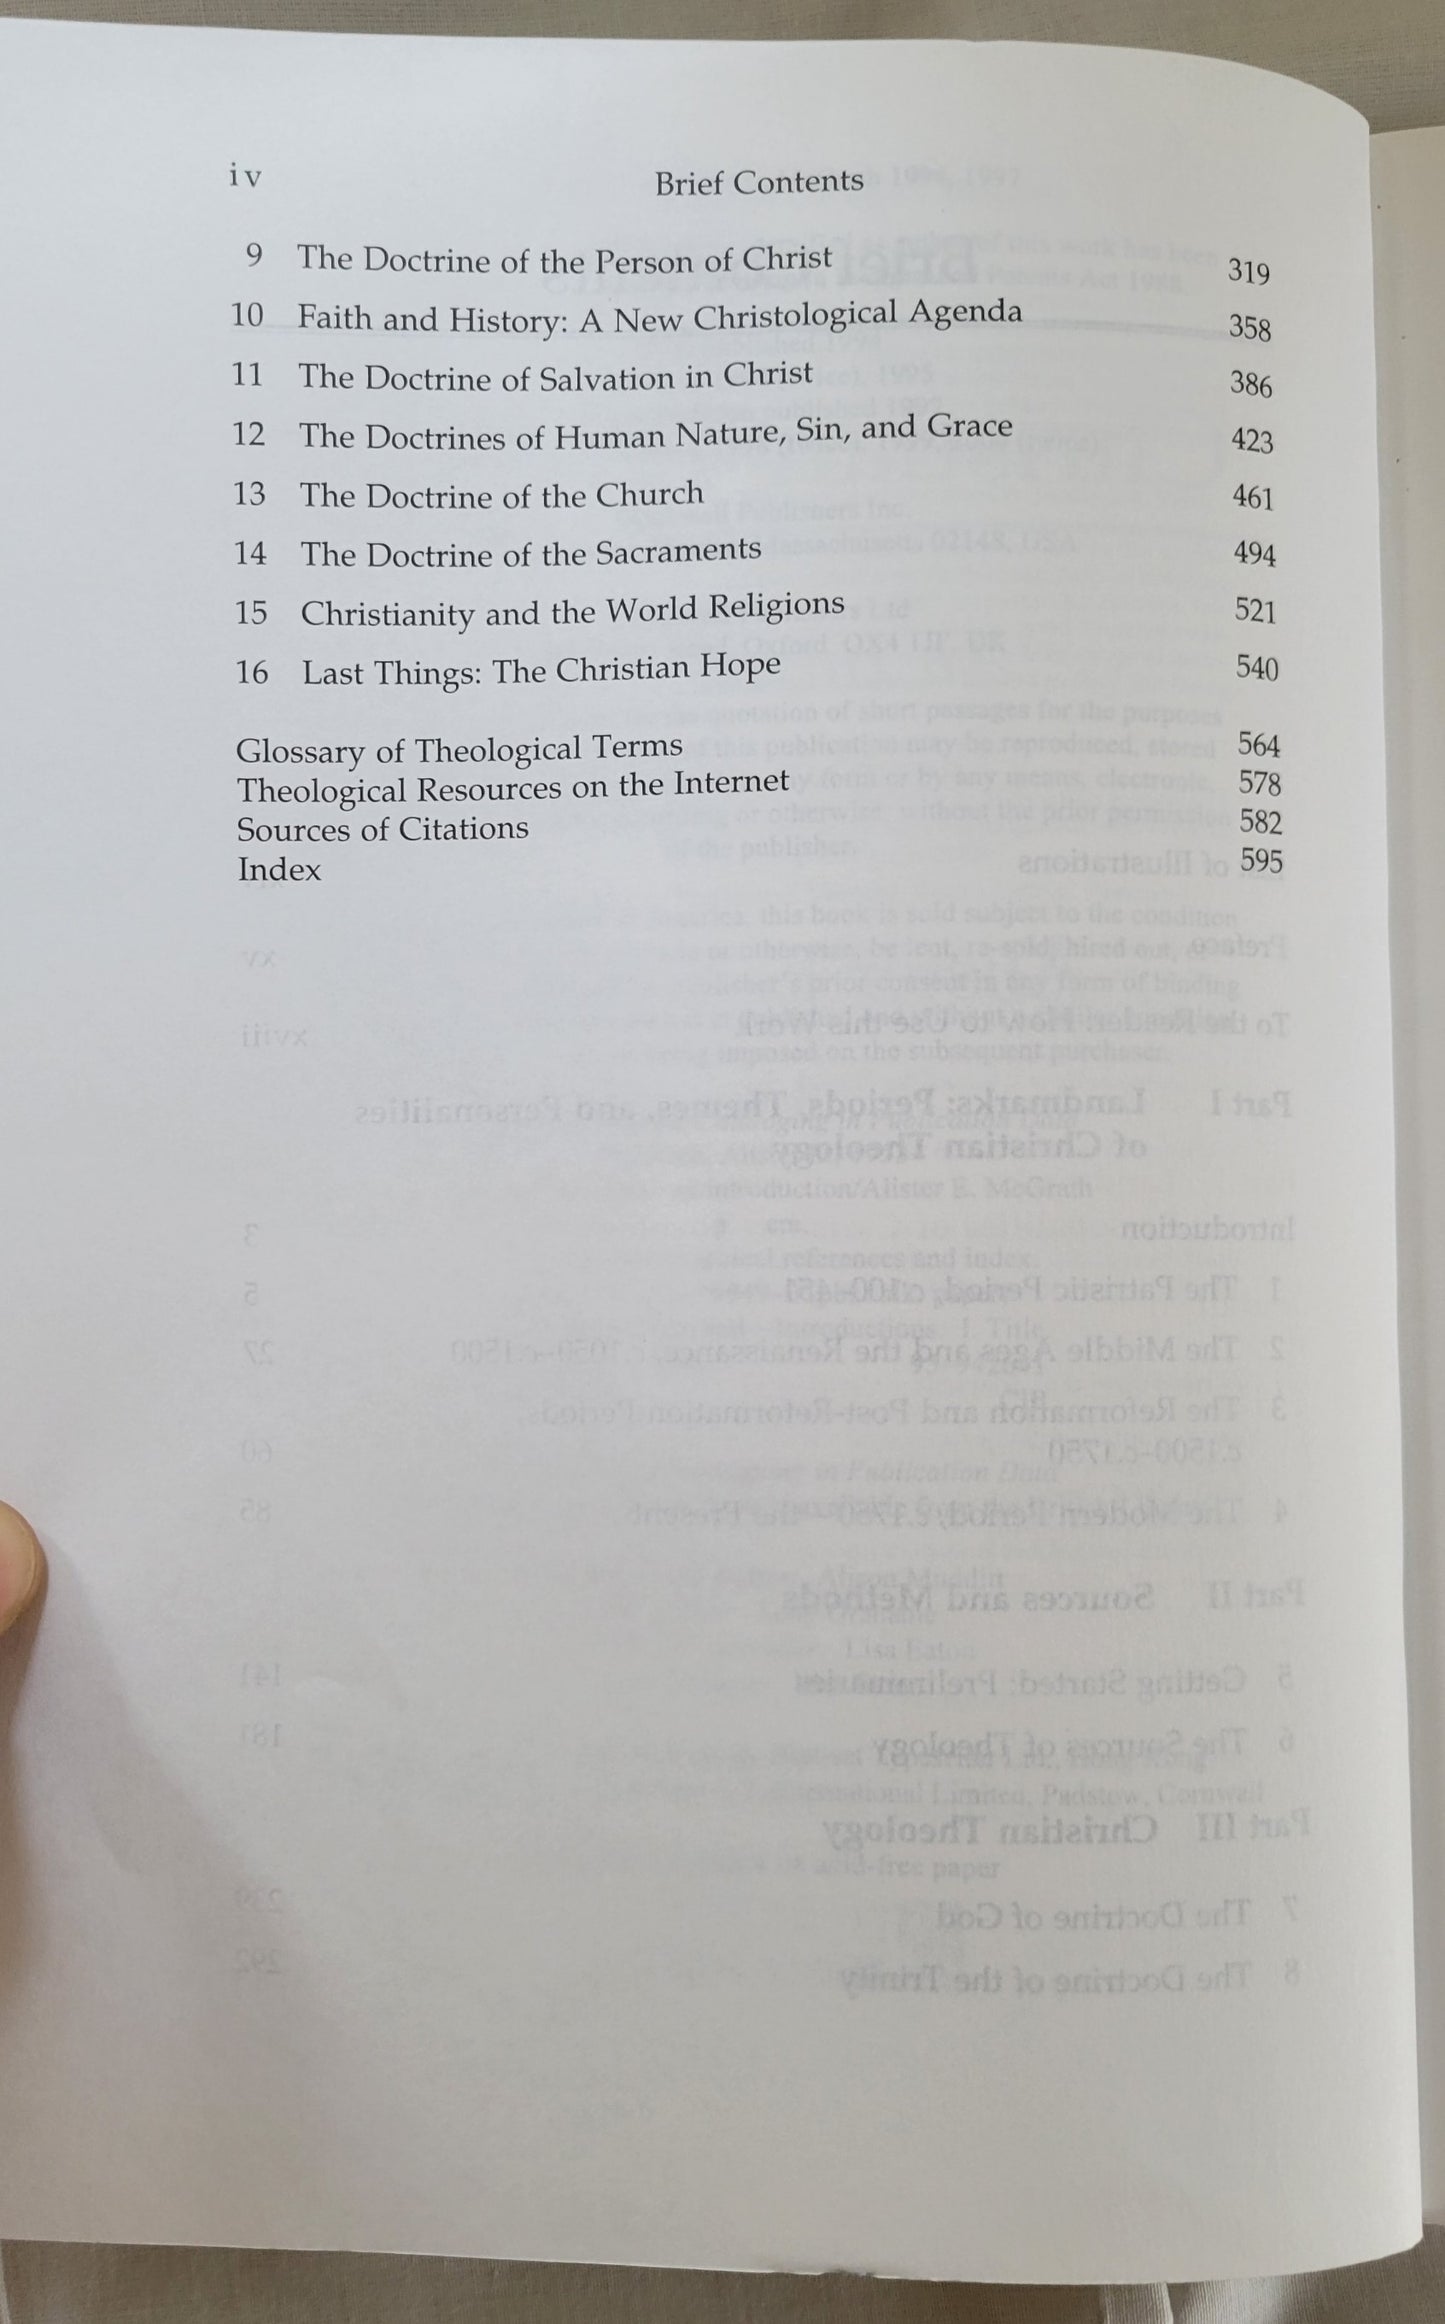 Used book. Christian Theology: An Introduction, Second Edition written by Alister McGrath, published by Blackwell Publishers.  View of table of contents.